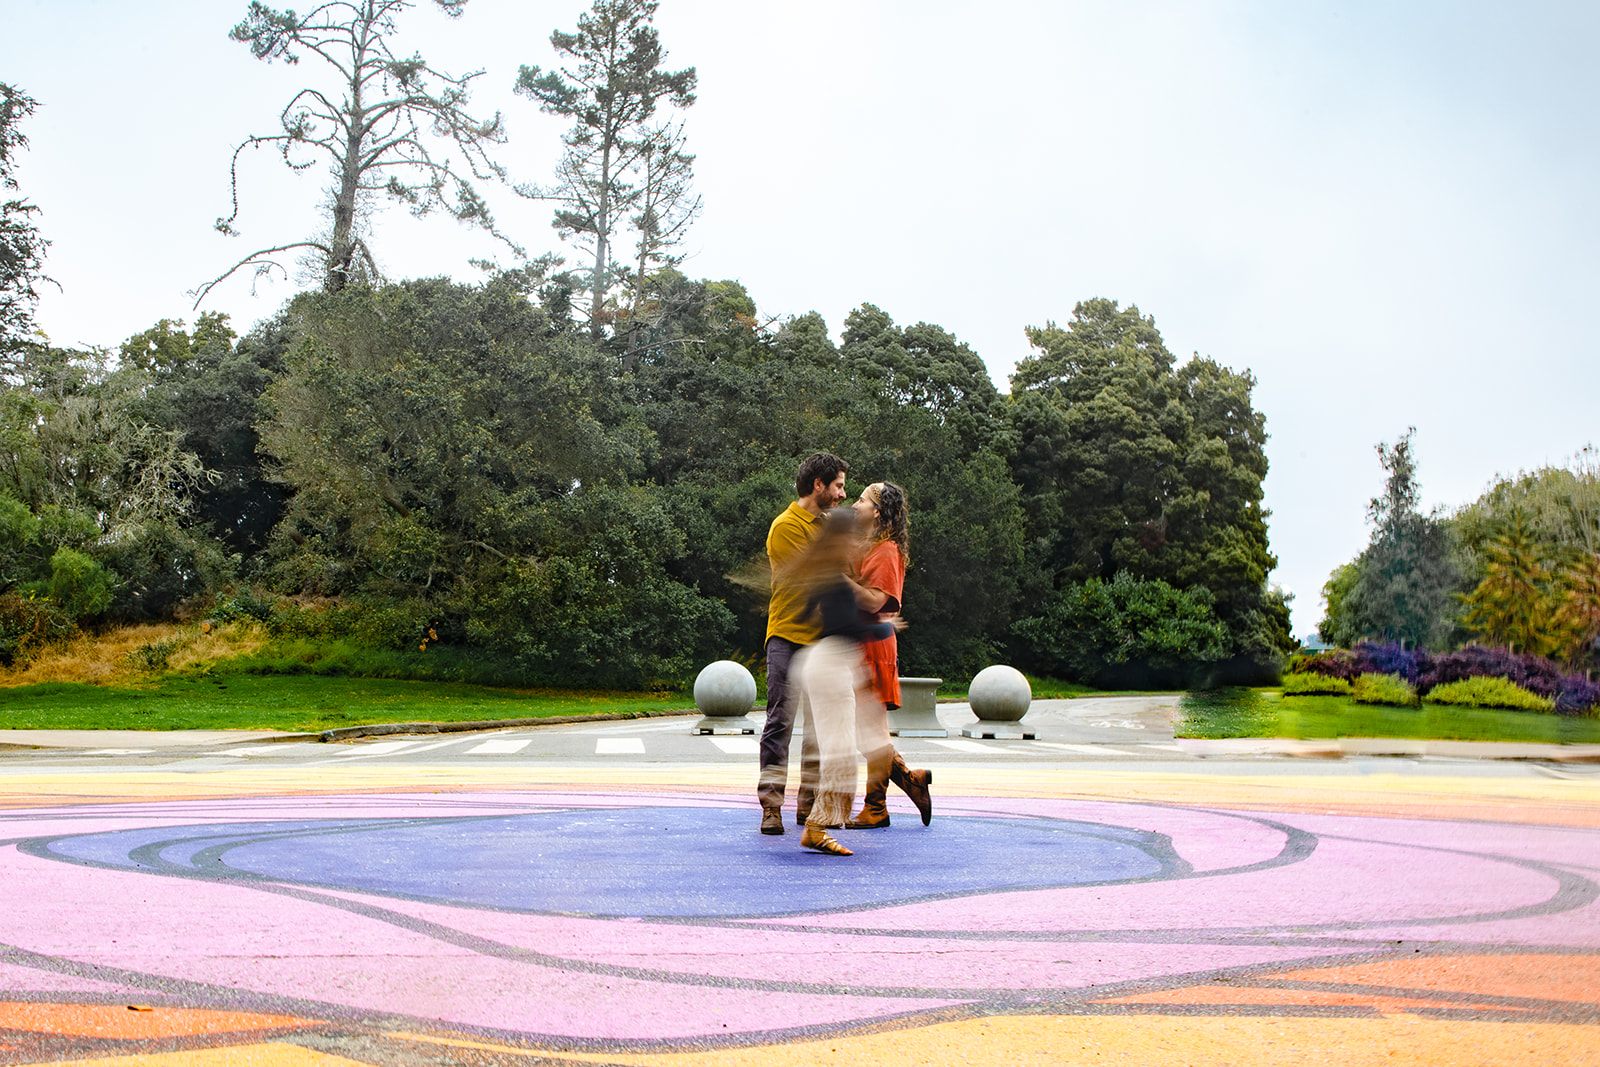 A Family Photoshoot in San Francisco at Golden Gate Park